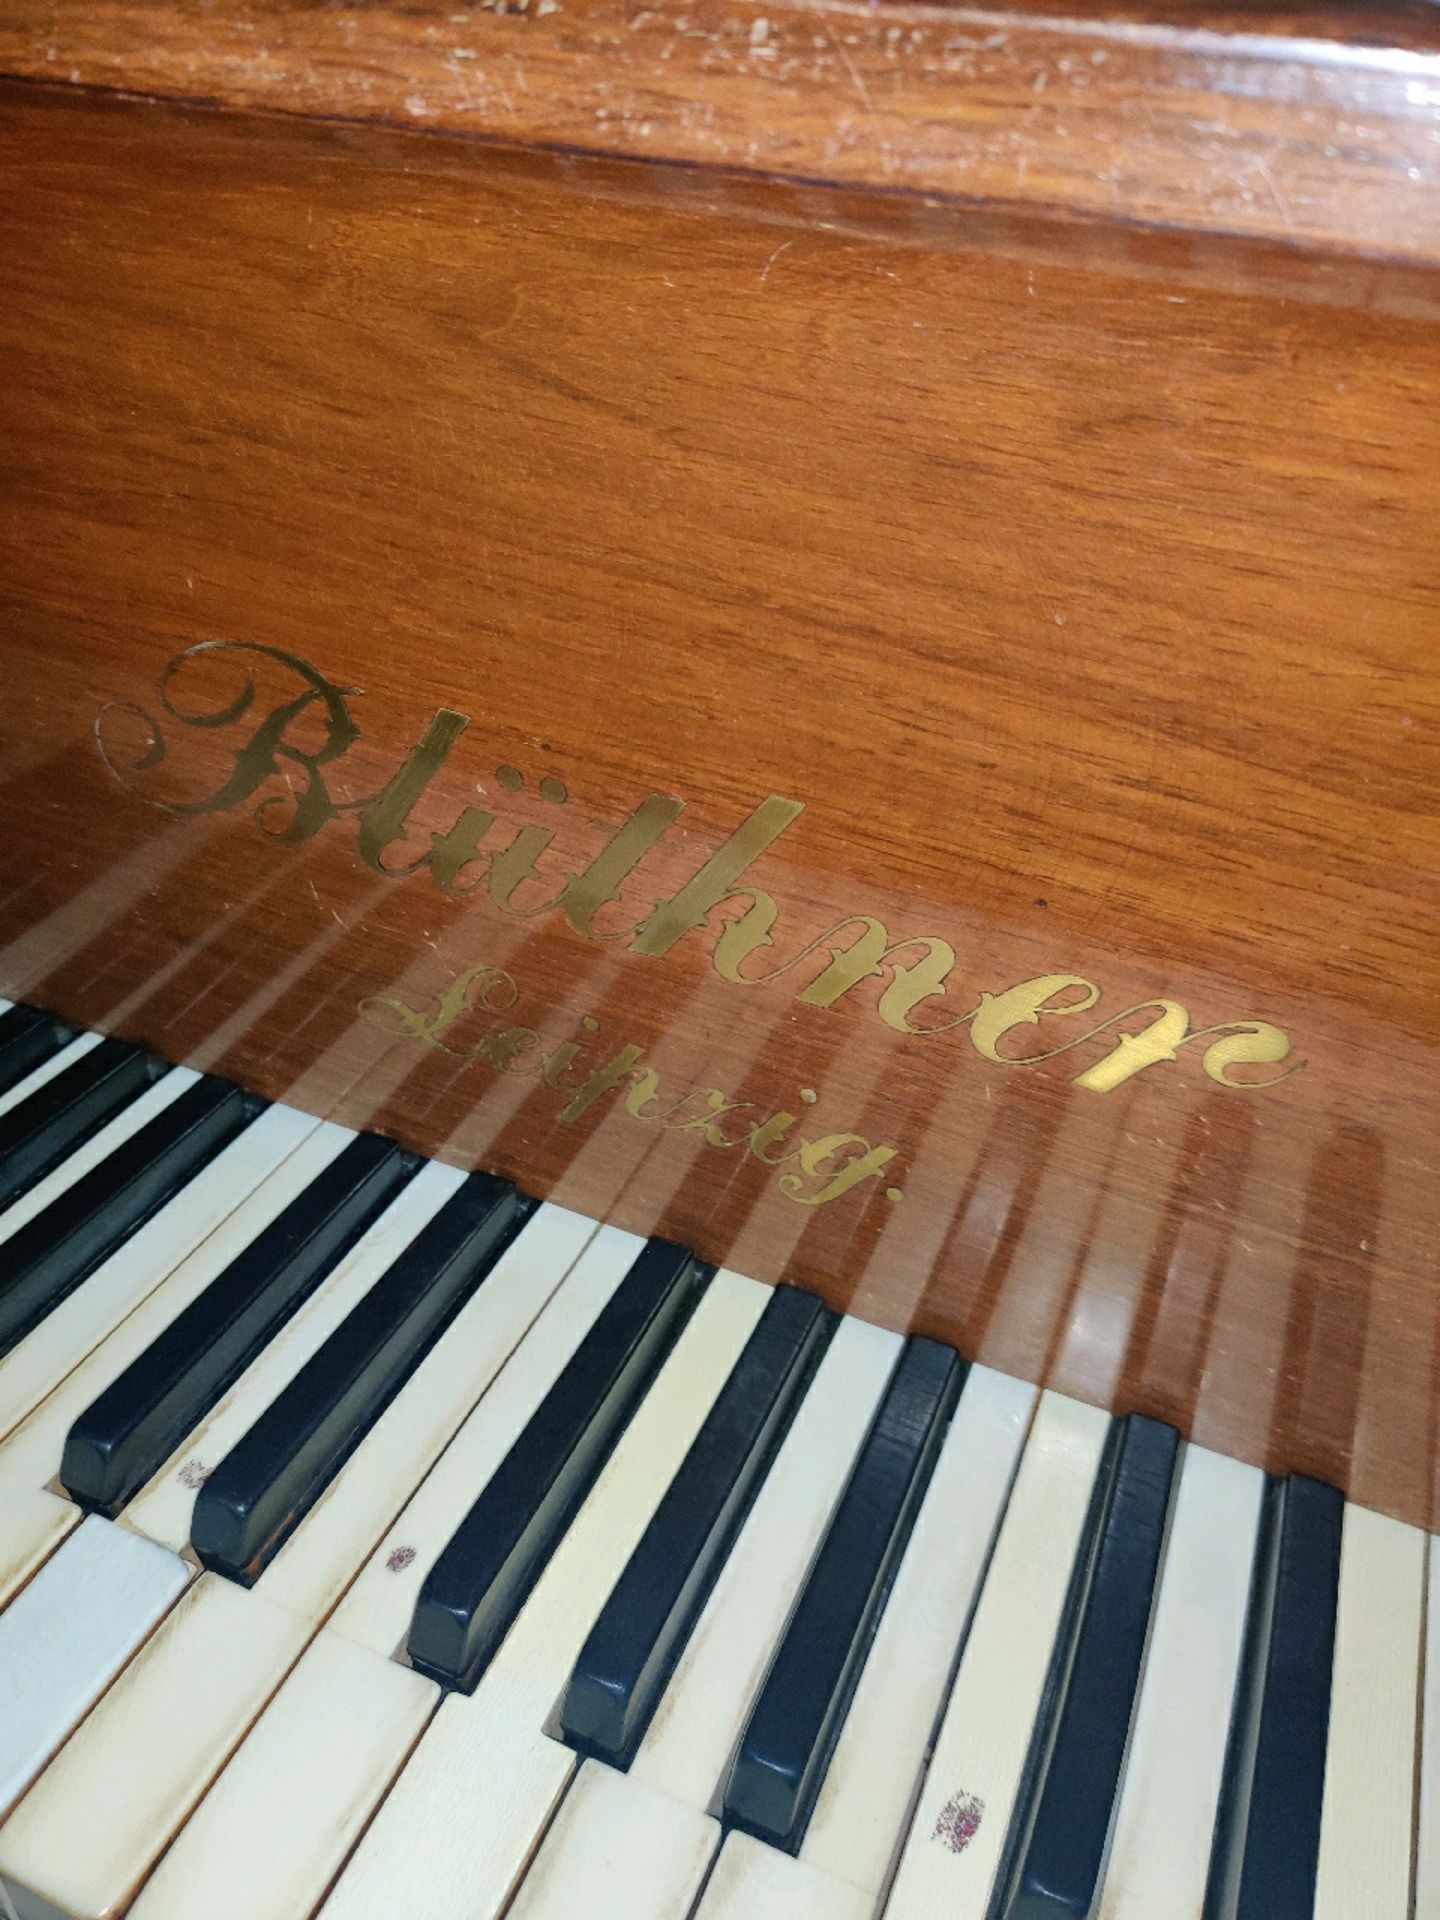 Bluthner Grand piano - Image 9 of 10